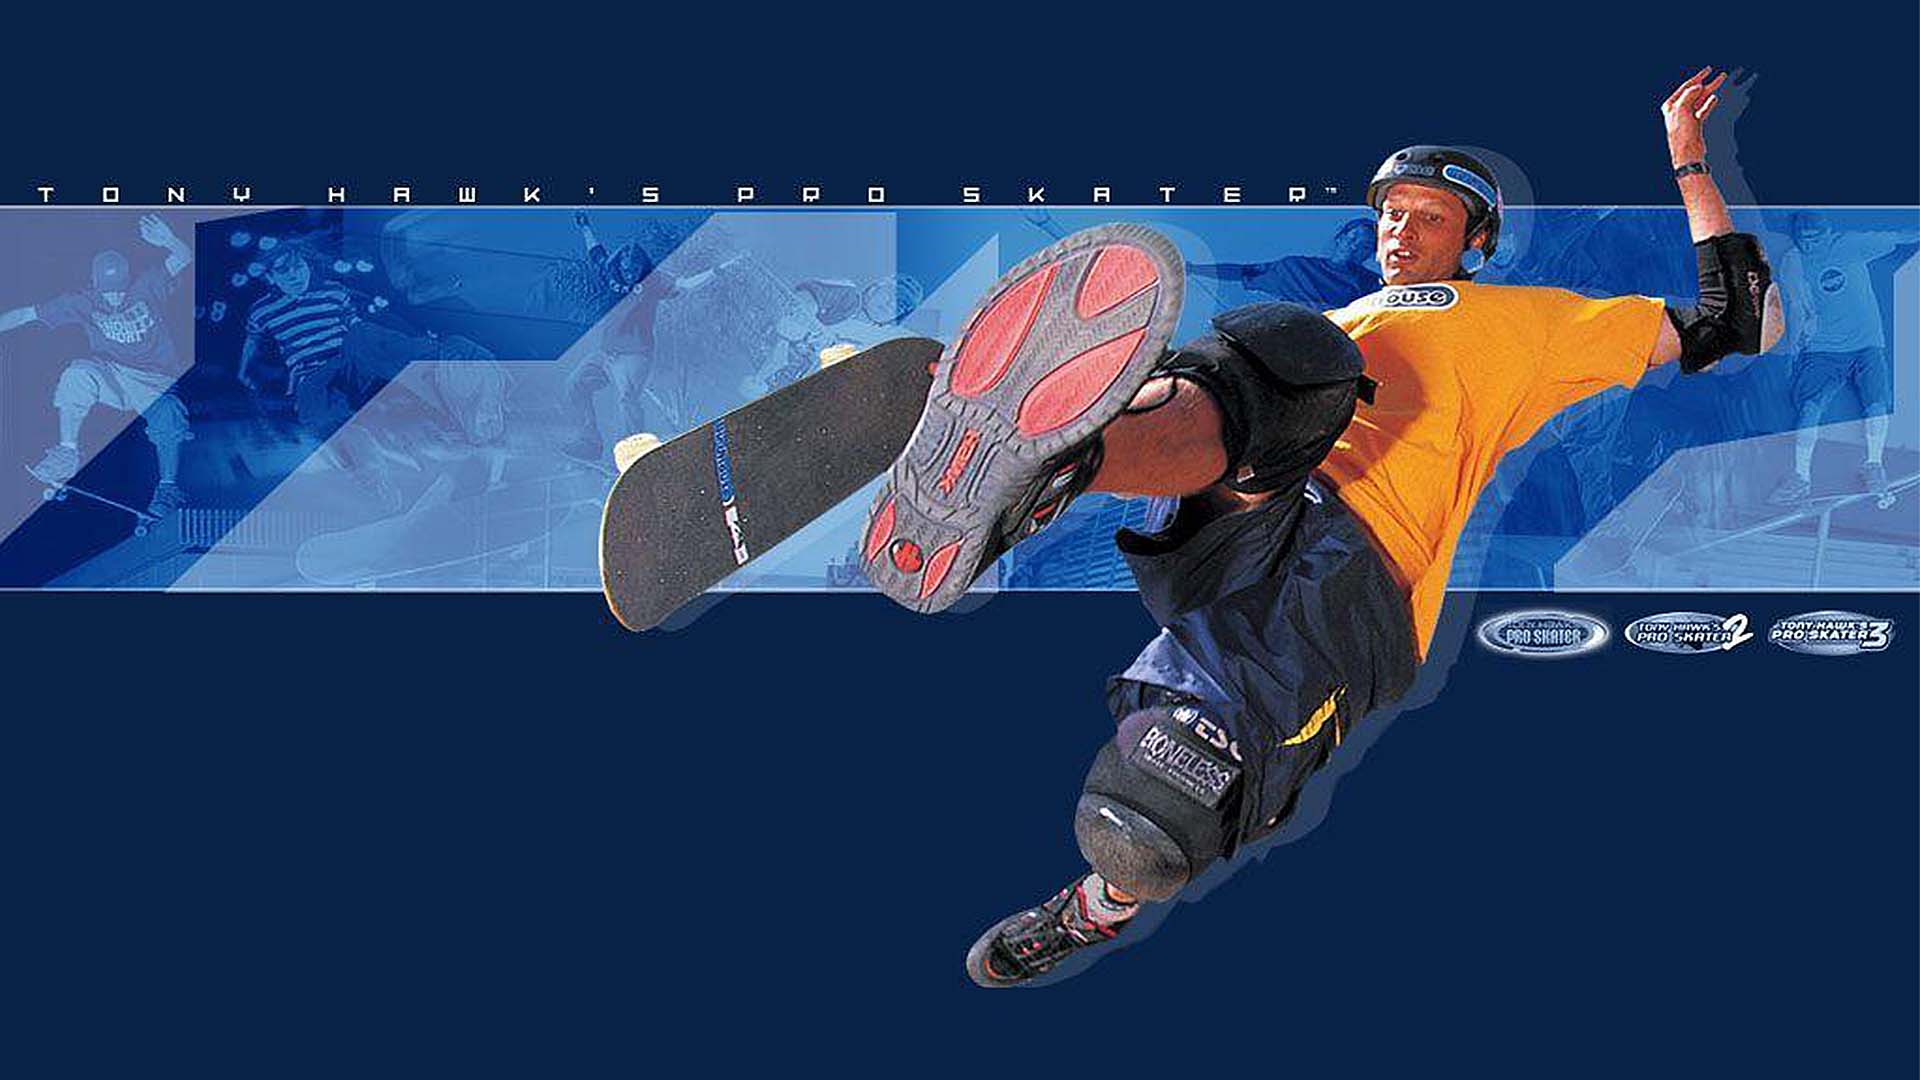 Tony Hawk's new Pro Skater could arrive this year